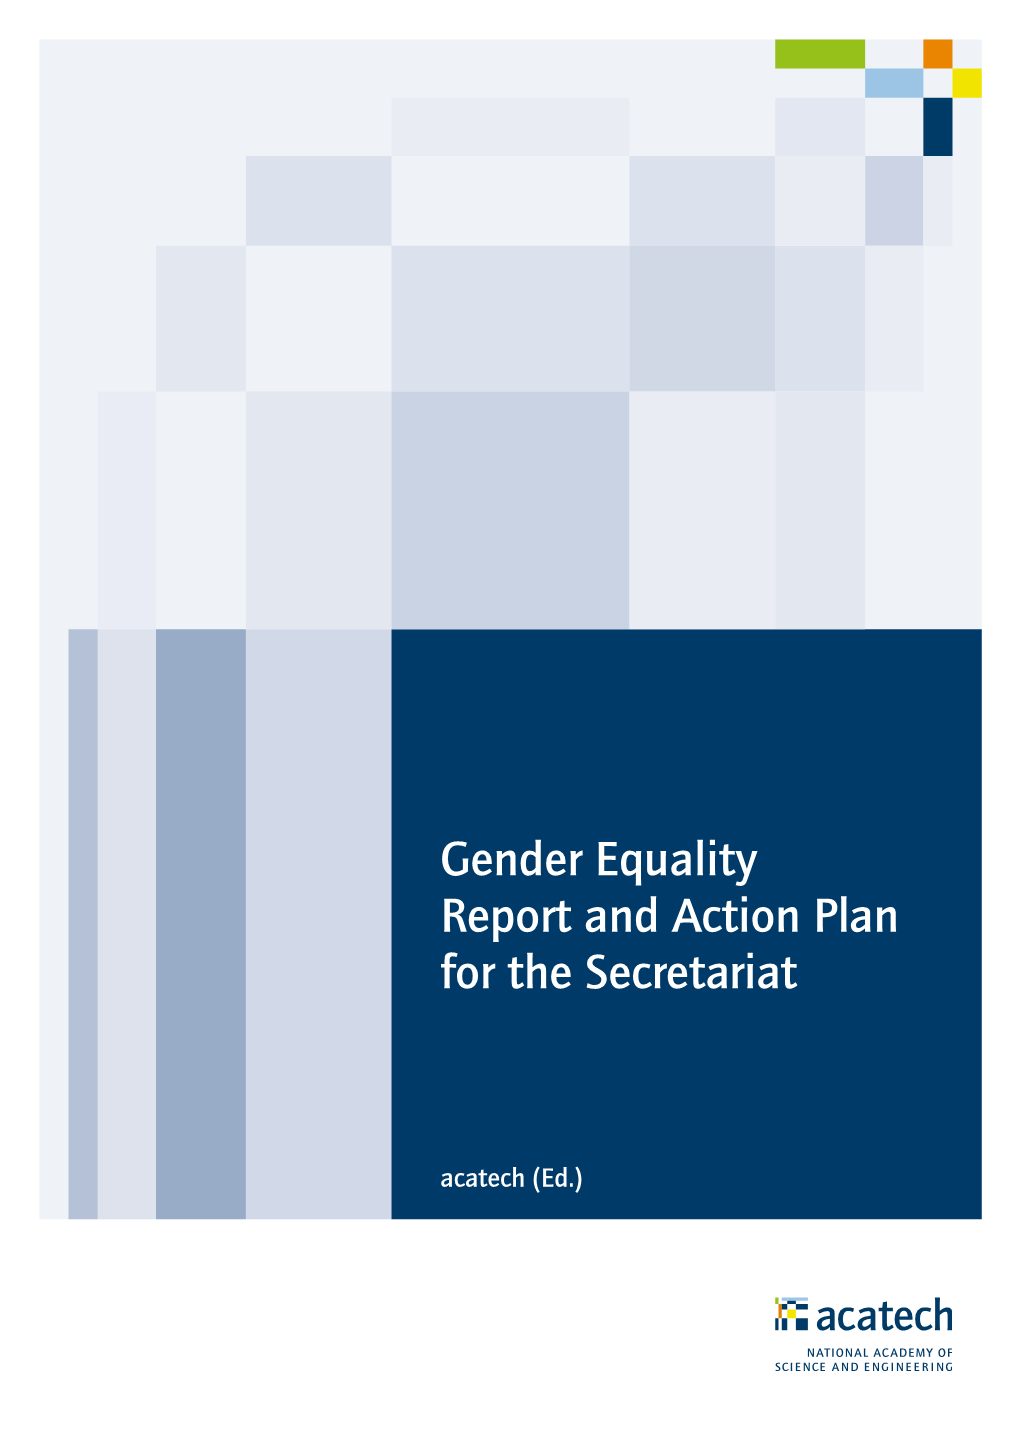 Gender Equality Report and Action Plan for the Secretariat